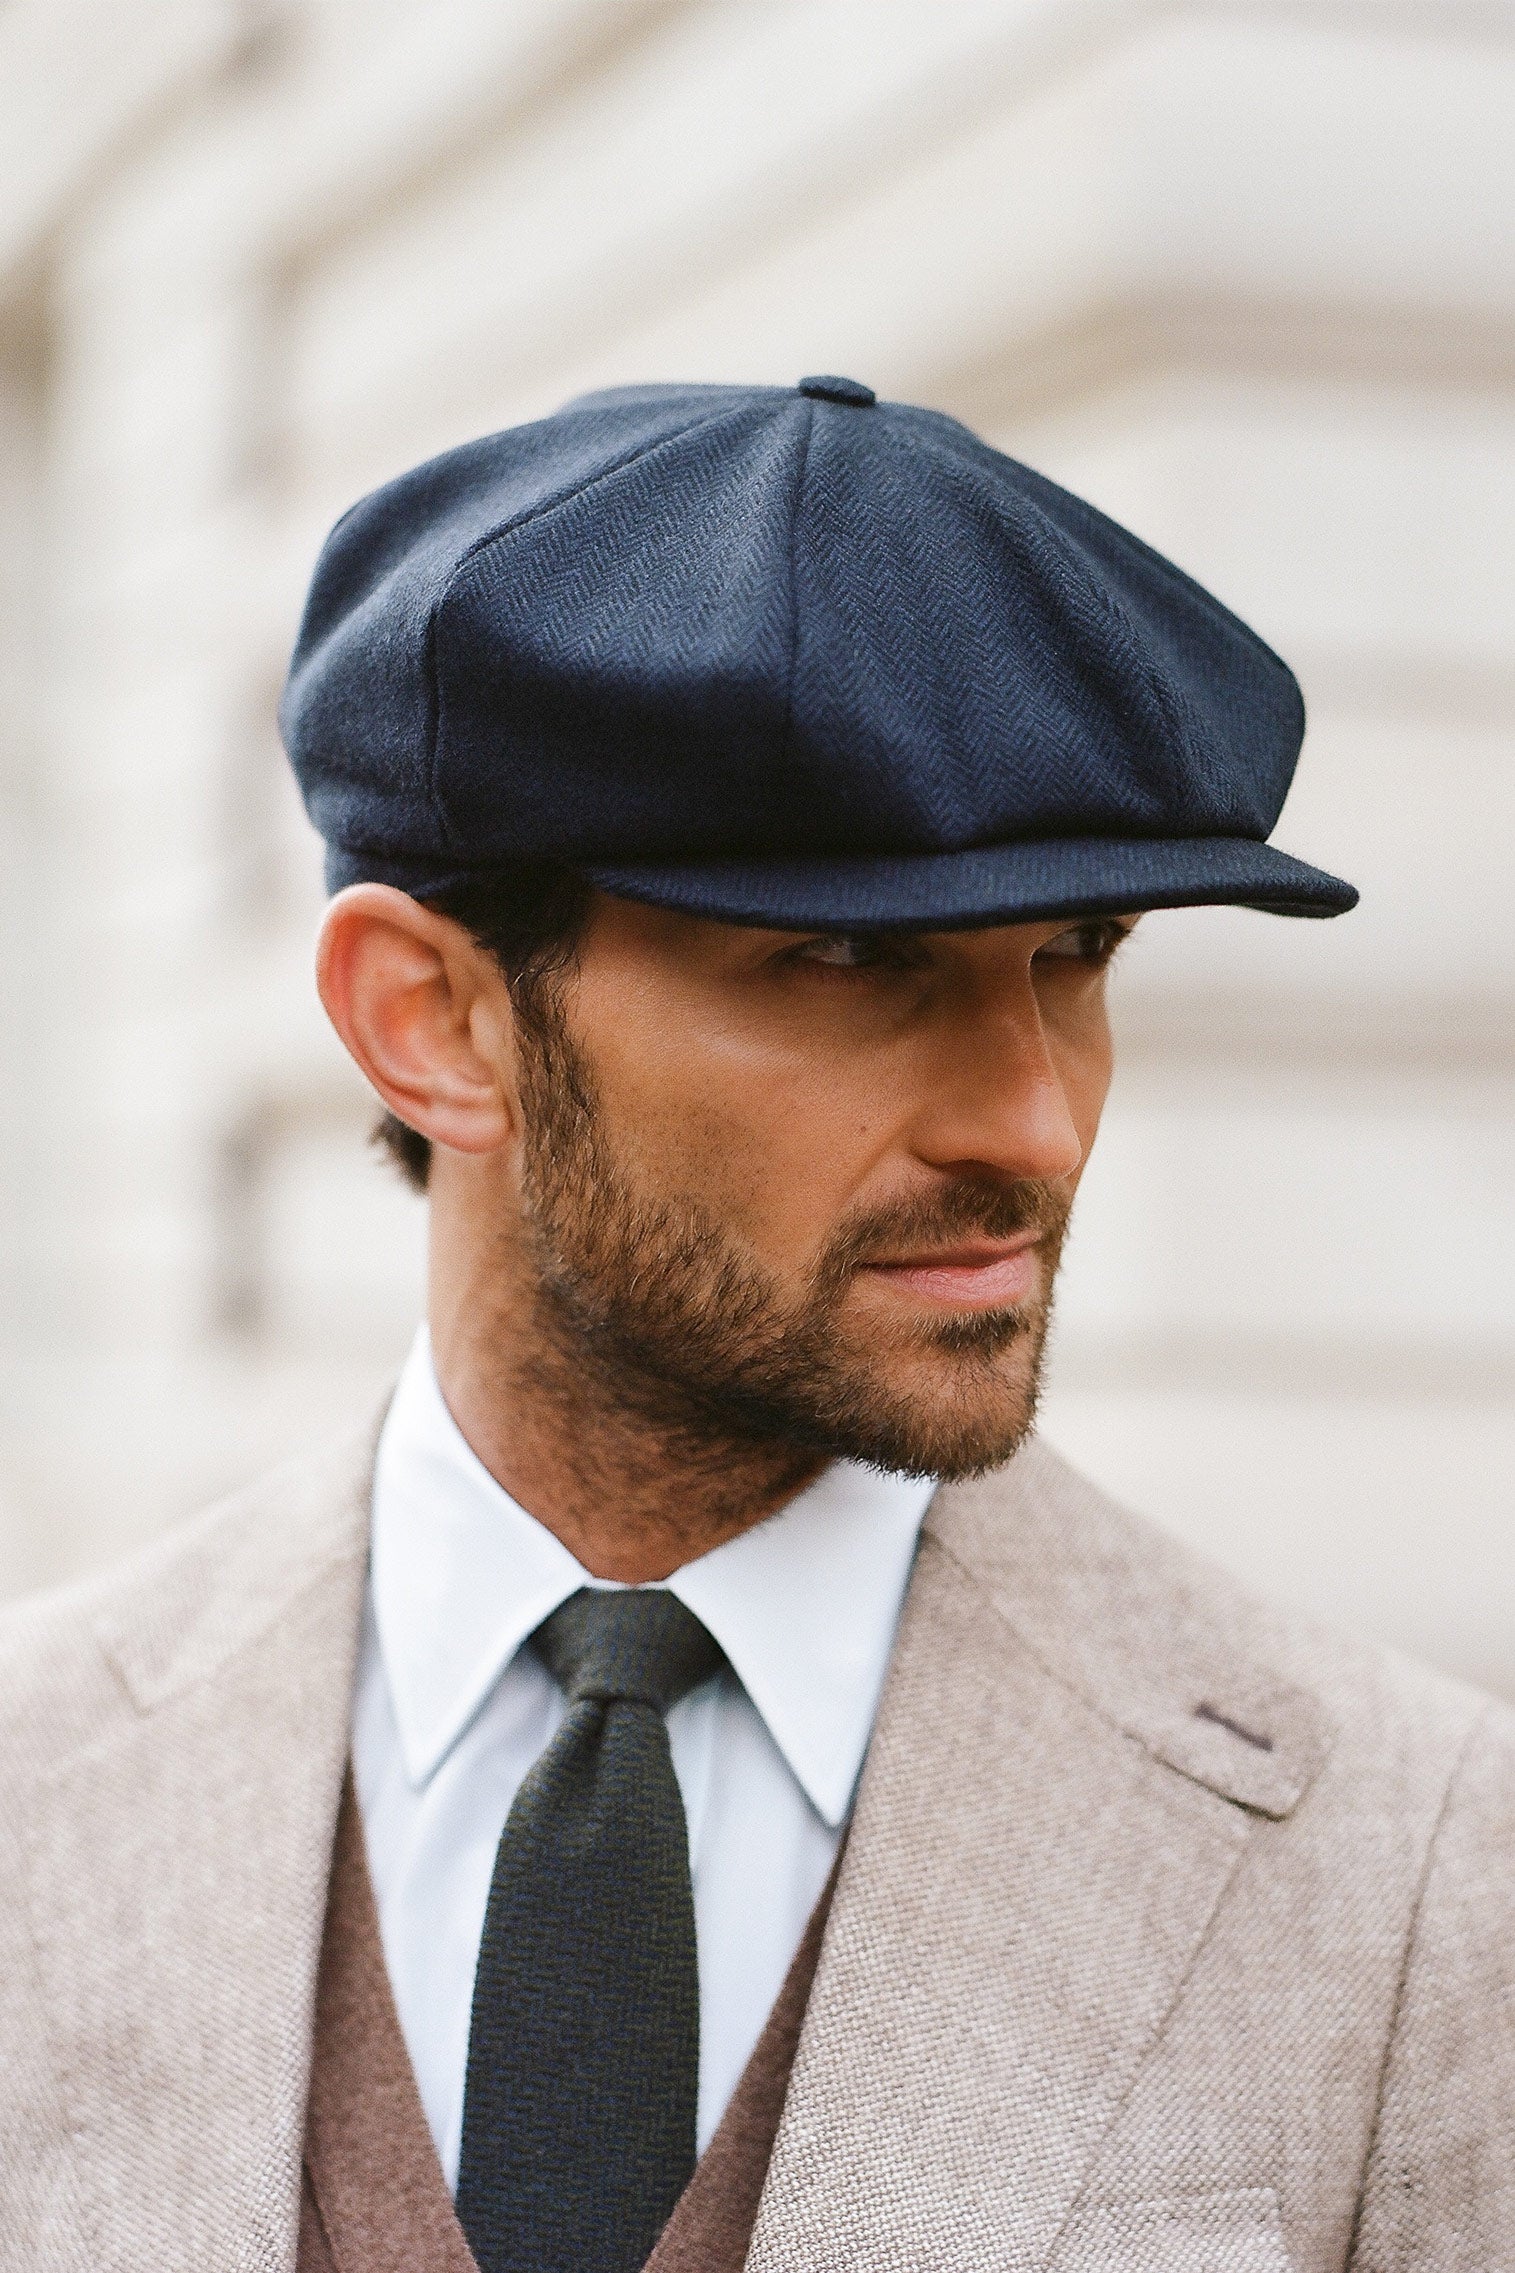 The Sixty - Hats for Slimmer Frames - Lock & Co. Hatters London UK